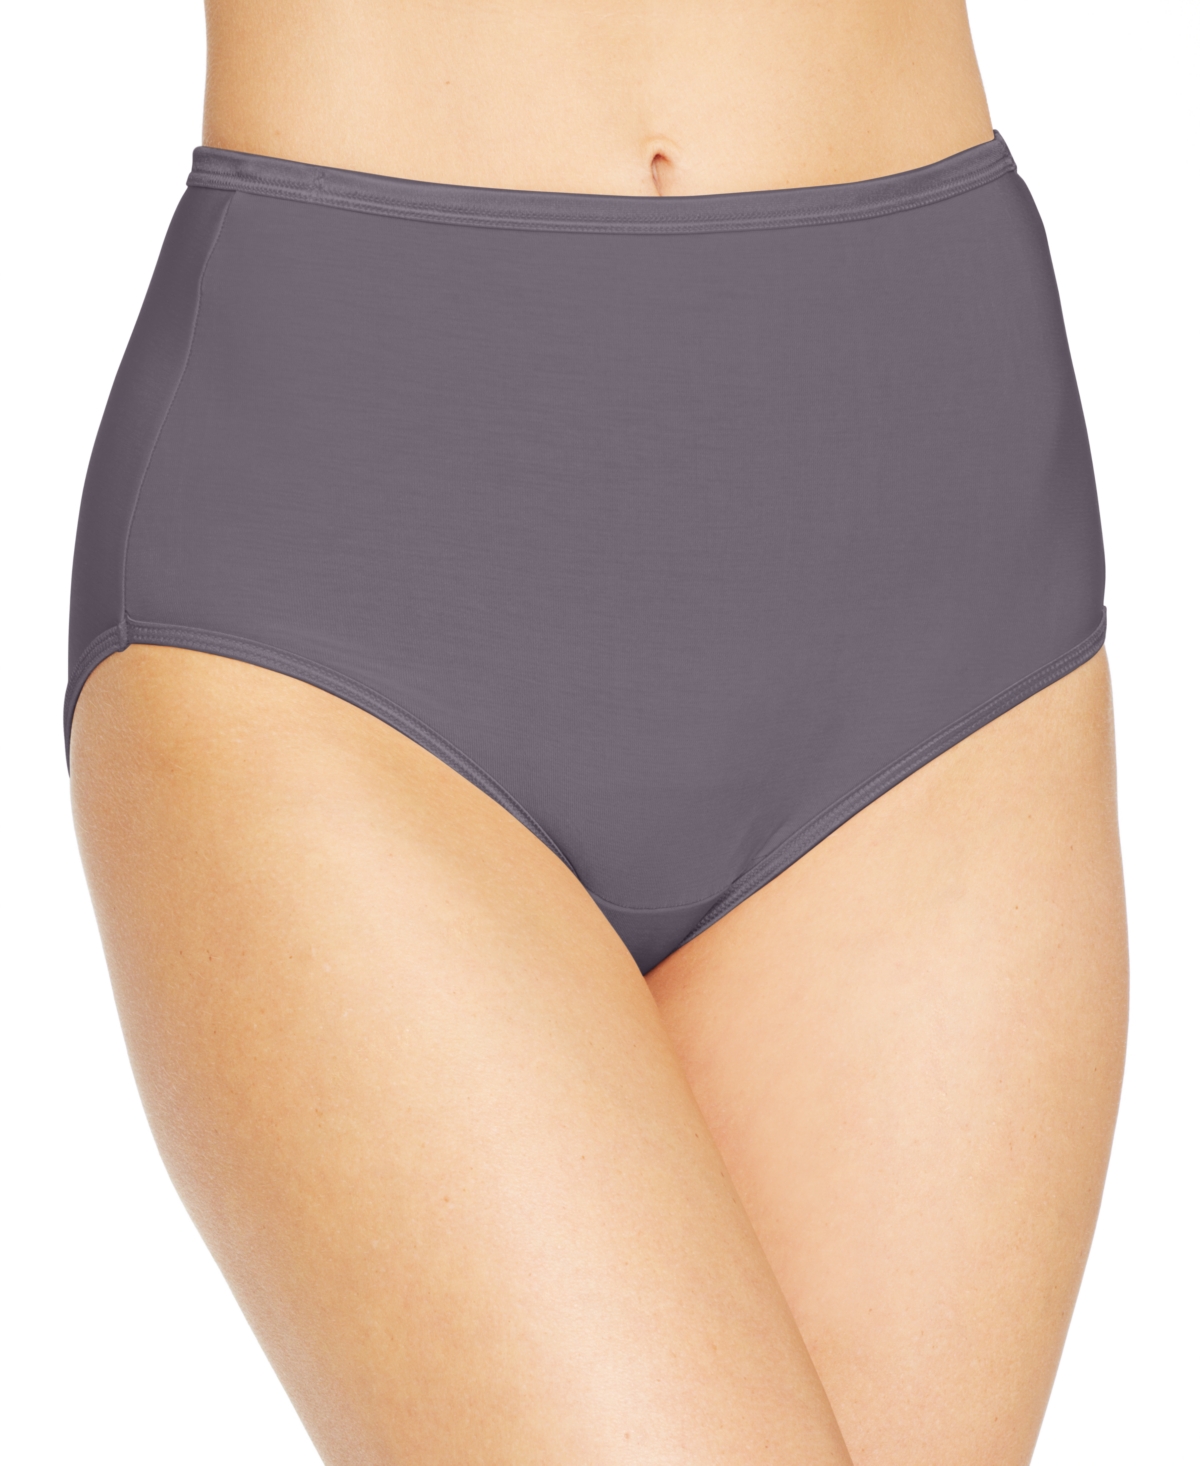 Vanity Fair Illumination Brief Underwear 13109, also available in extended  sizes